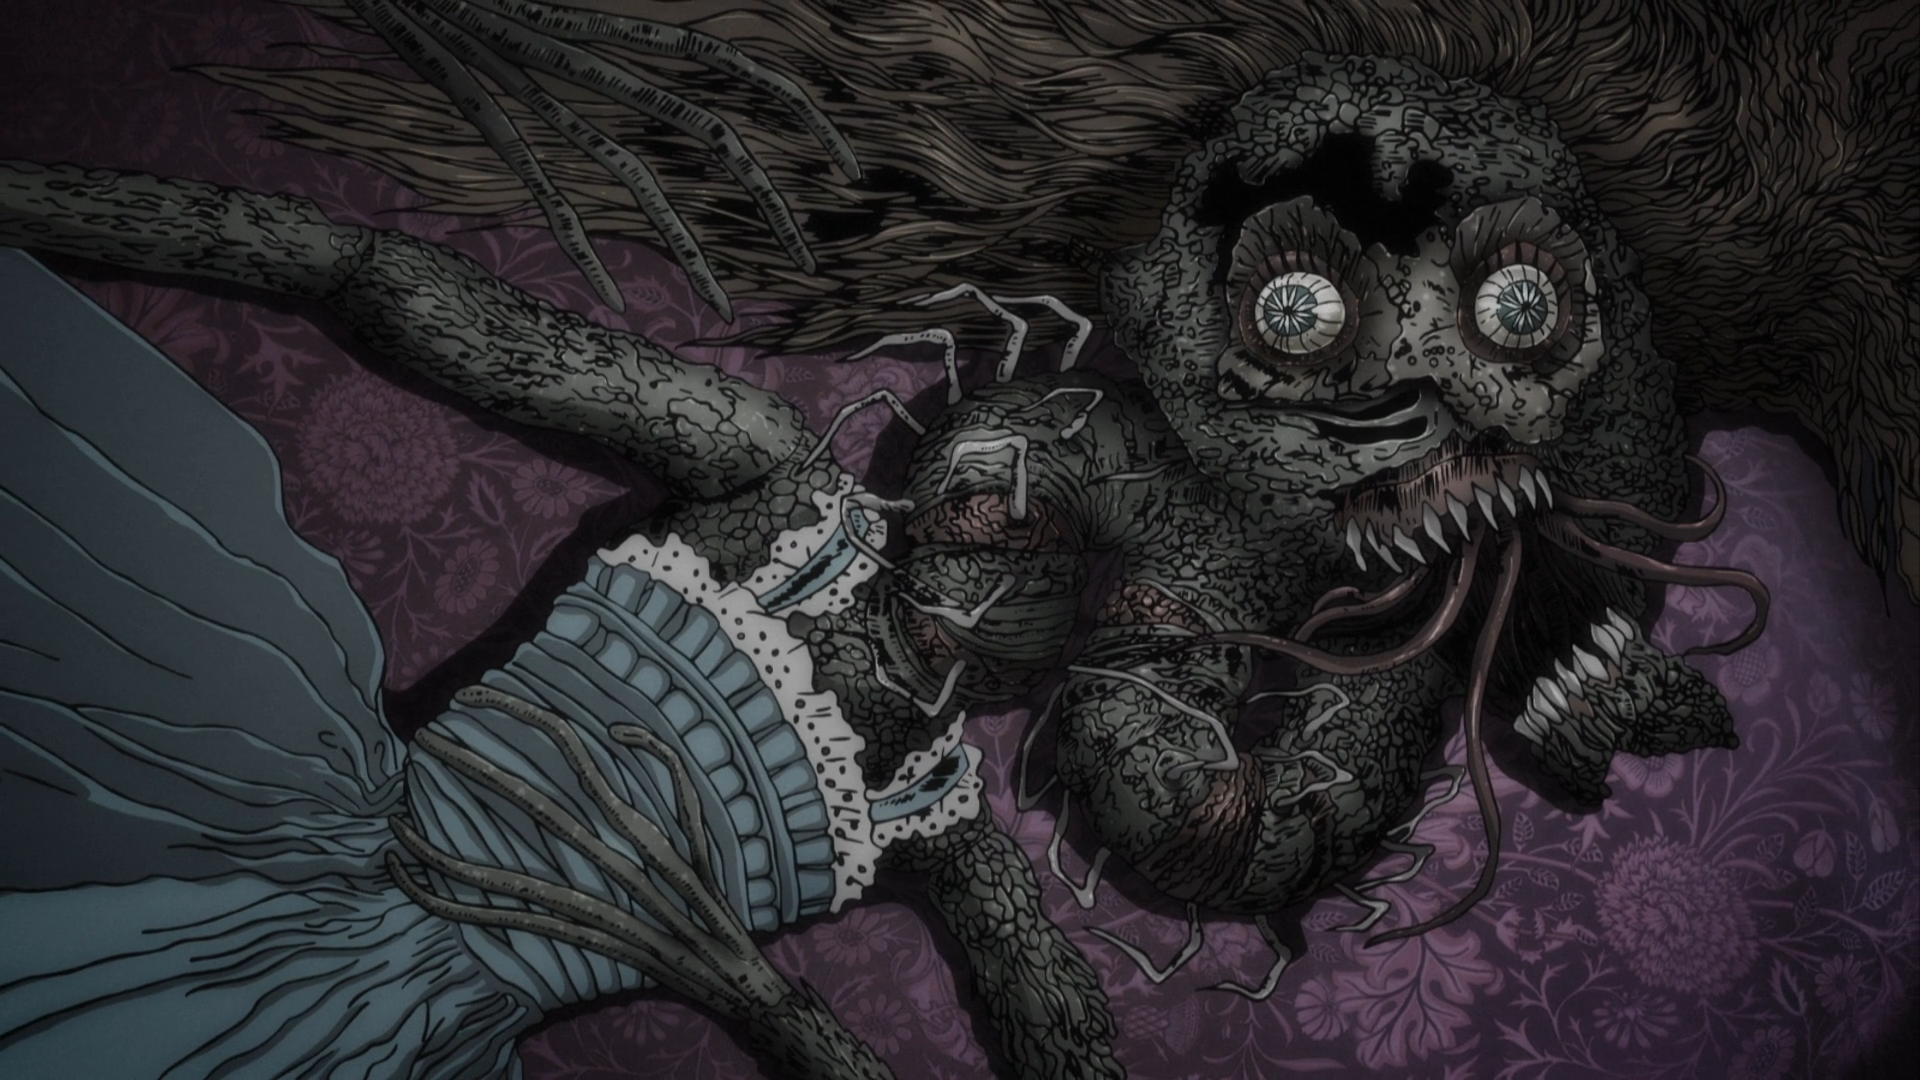 Free download Ito Junji Collection Wallpaper High Quality Download [1920x1080] for your Desktop, Mobile & Tablet. Explore Junji Ito Wallpaper. Junji Ito Wallpaper